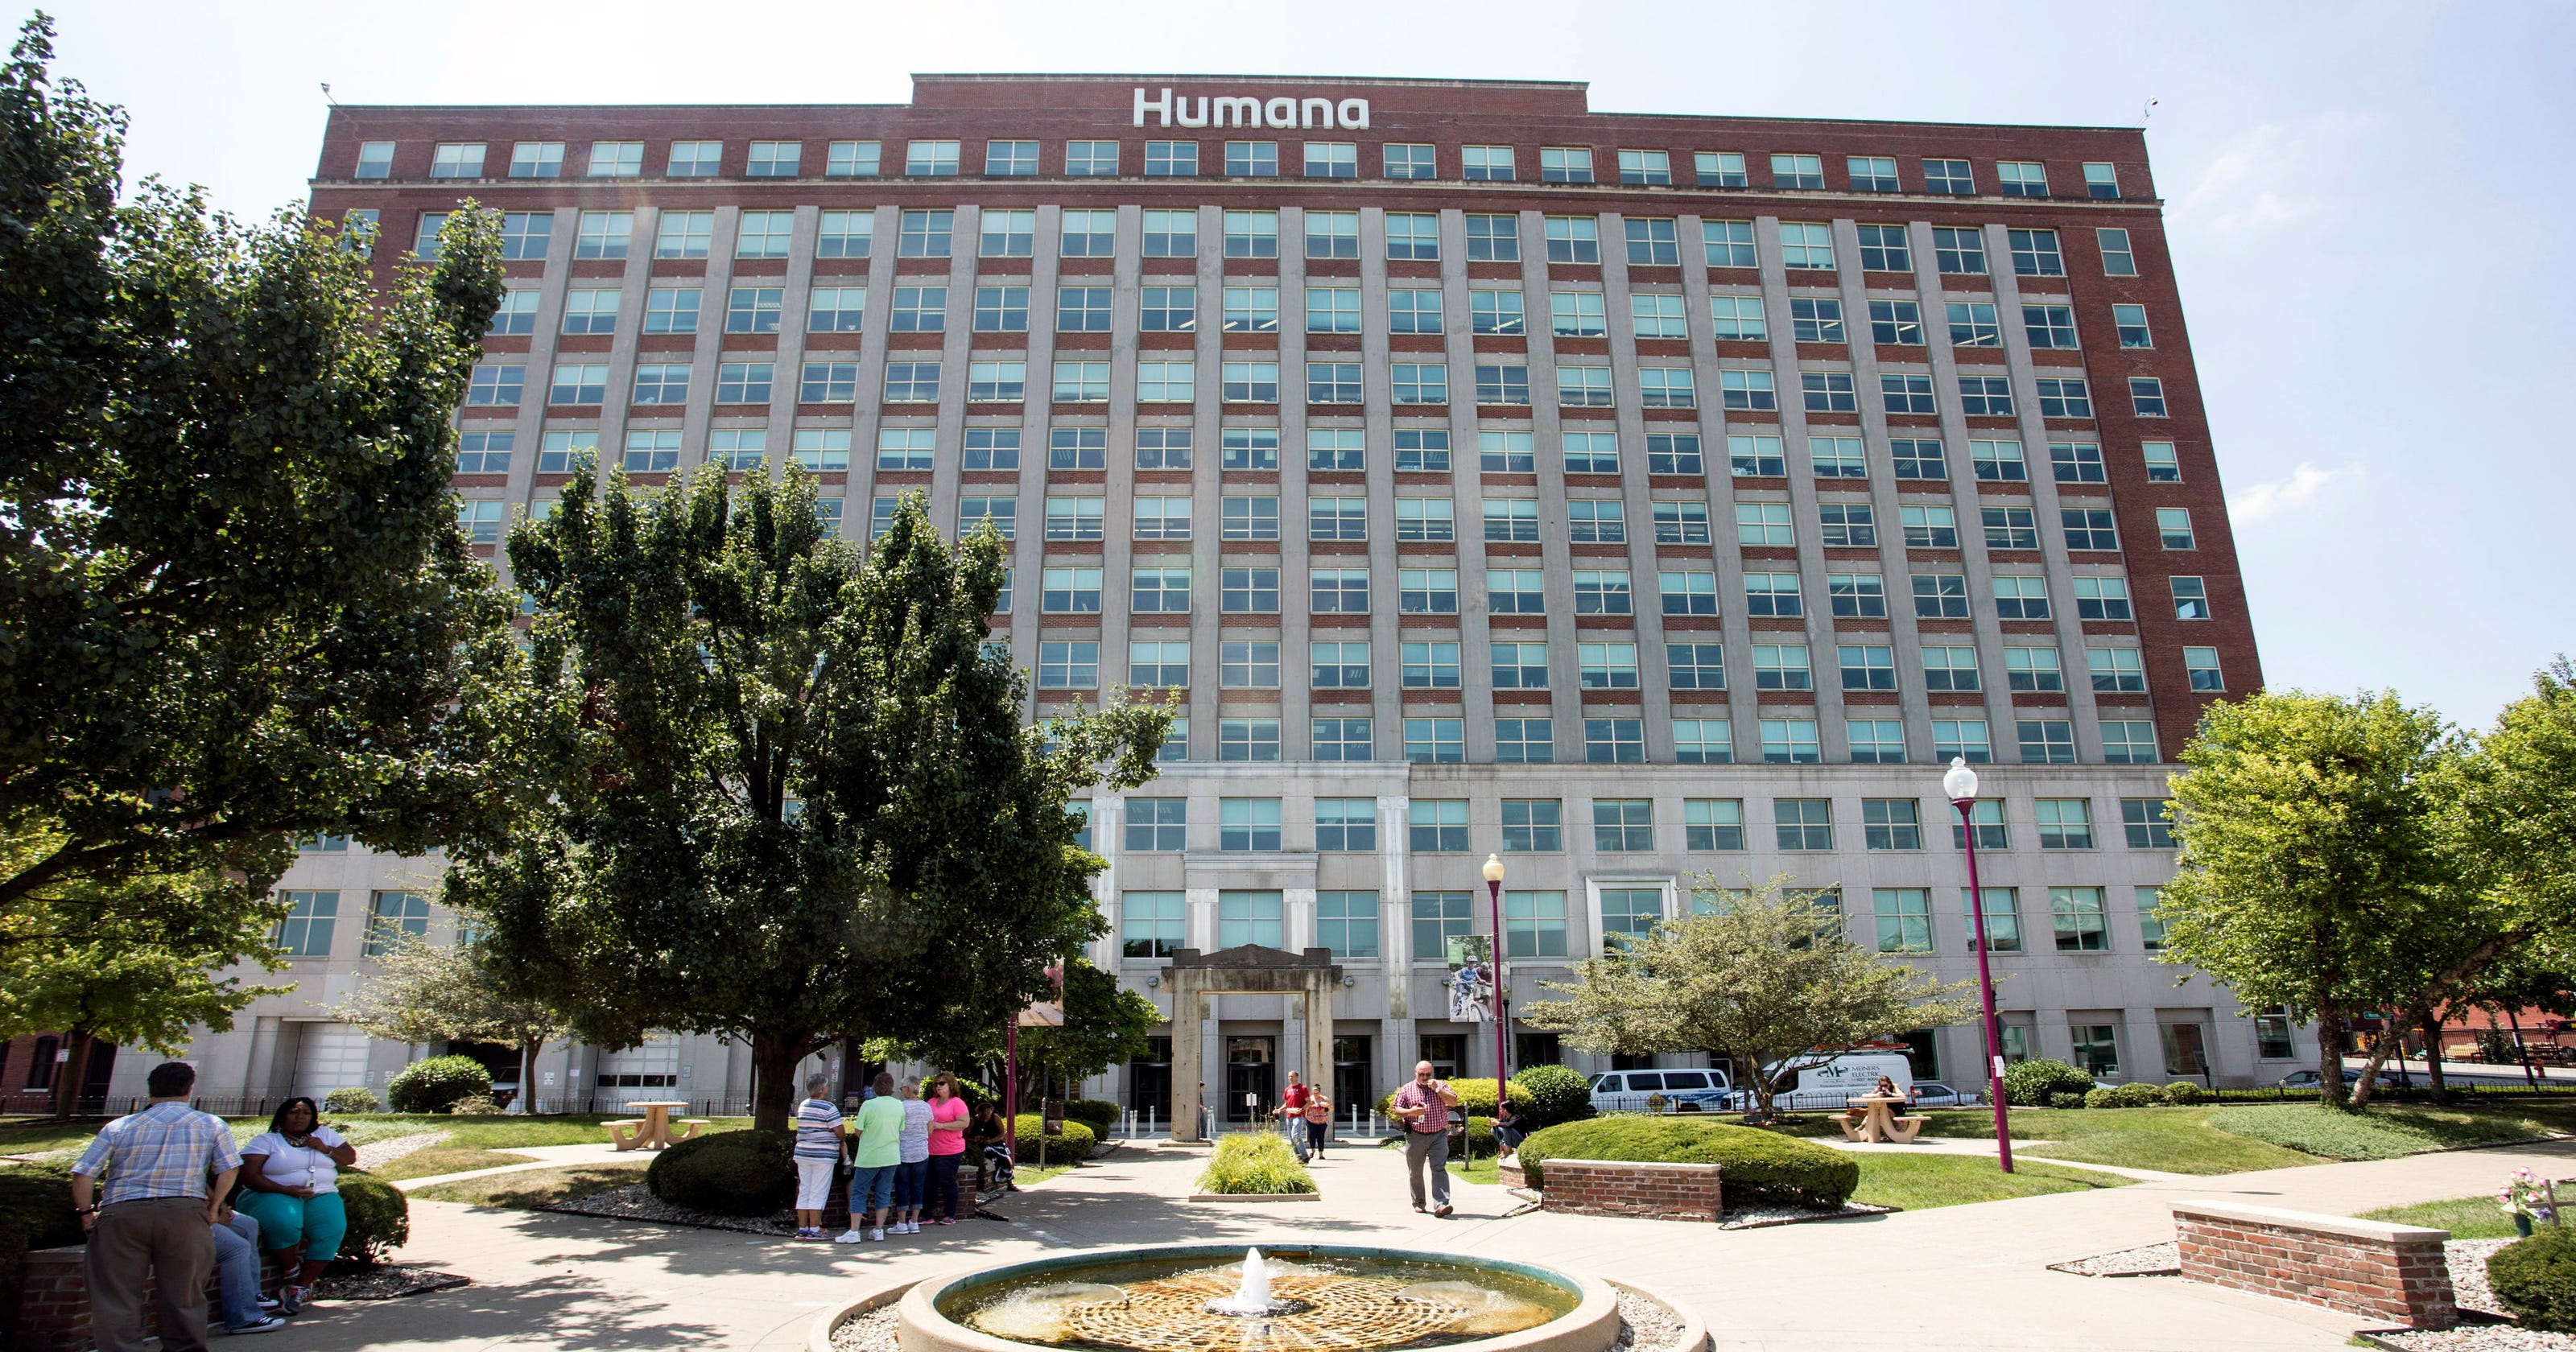 Humana Ceo Tamps Down Speculation On Walgreens Deal